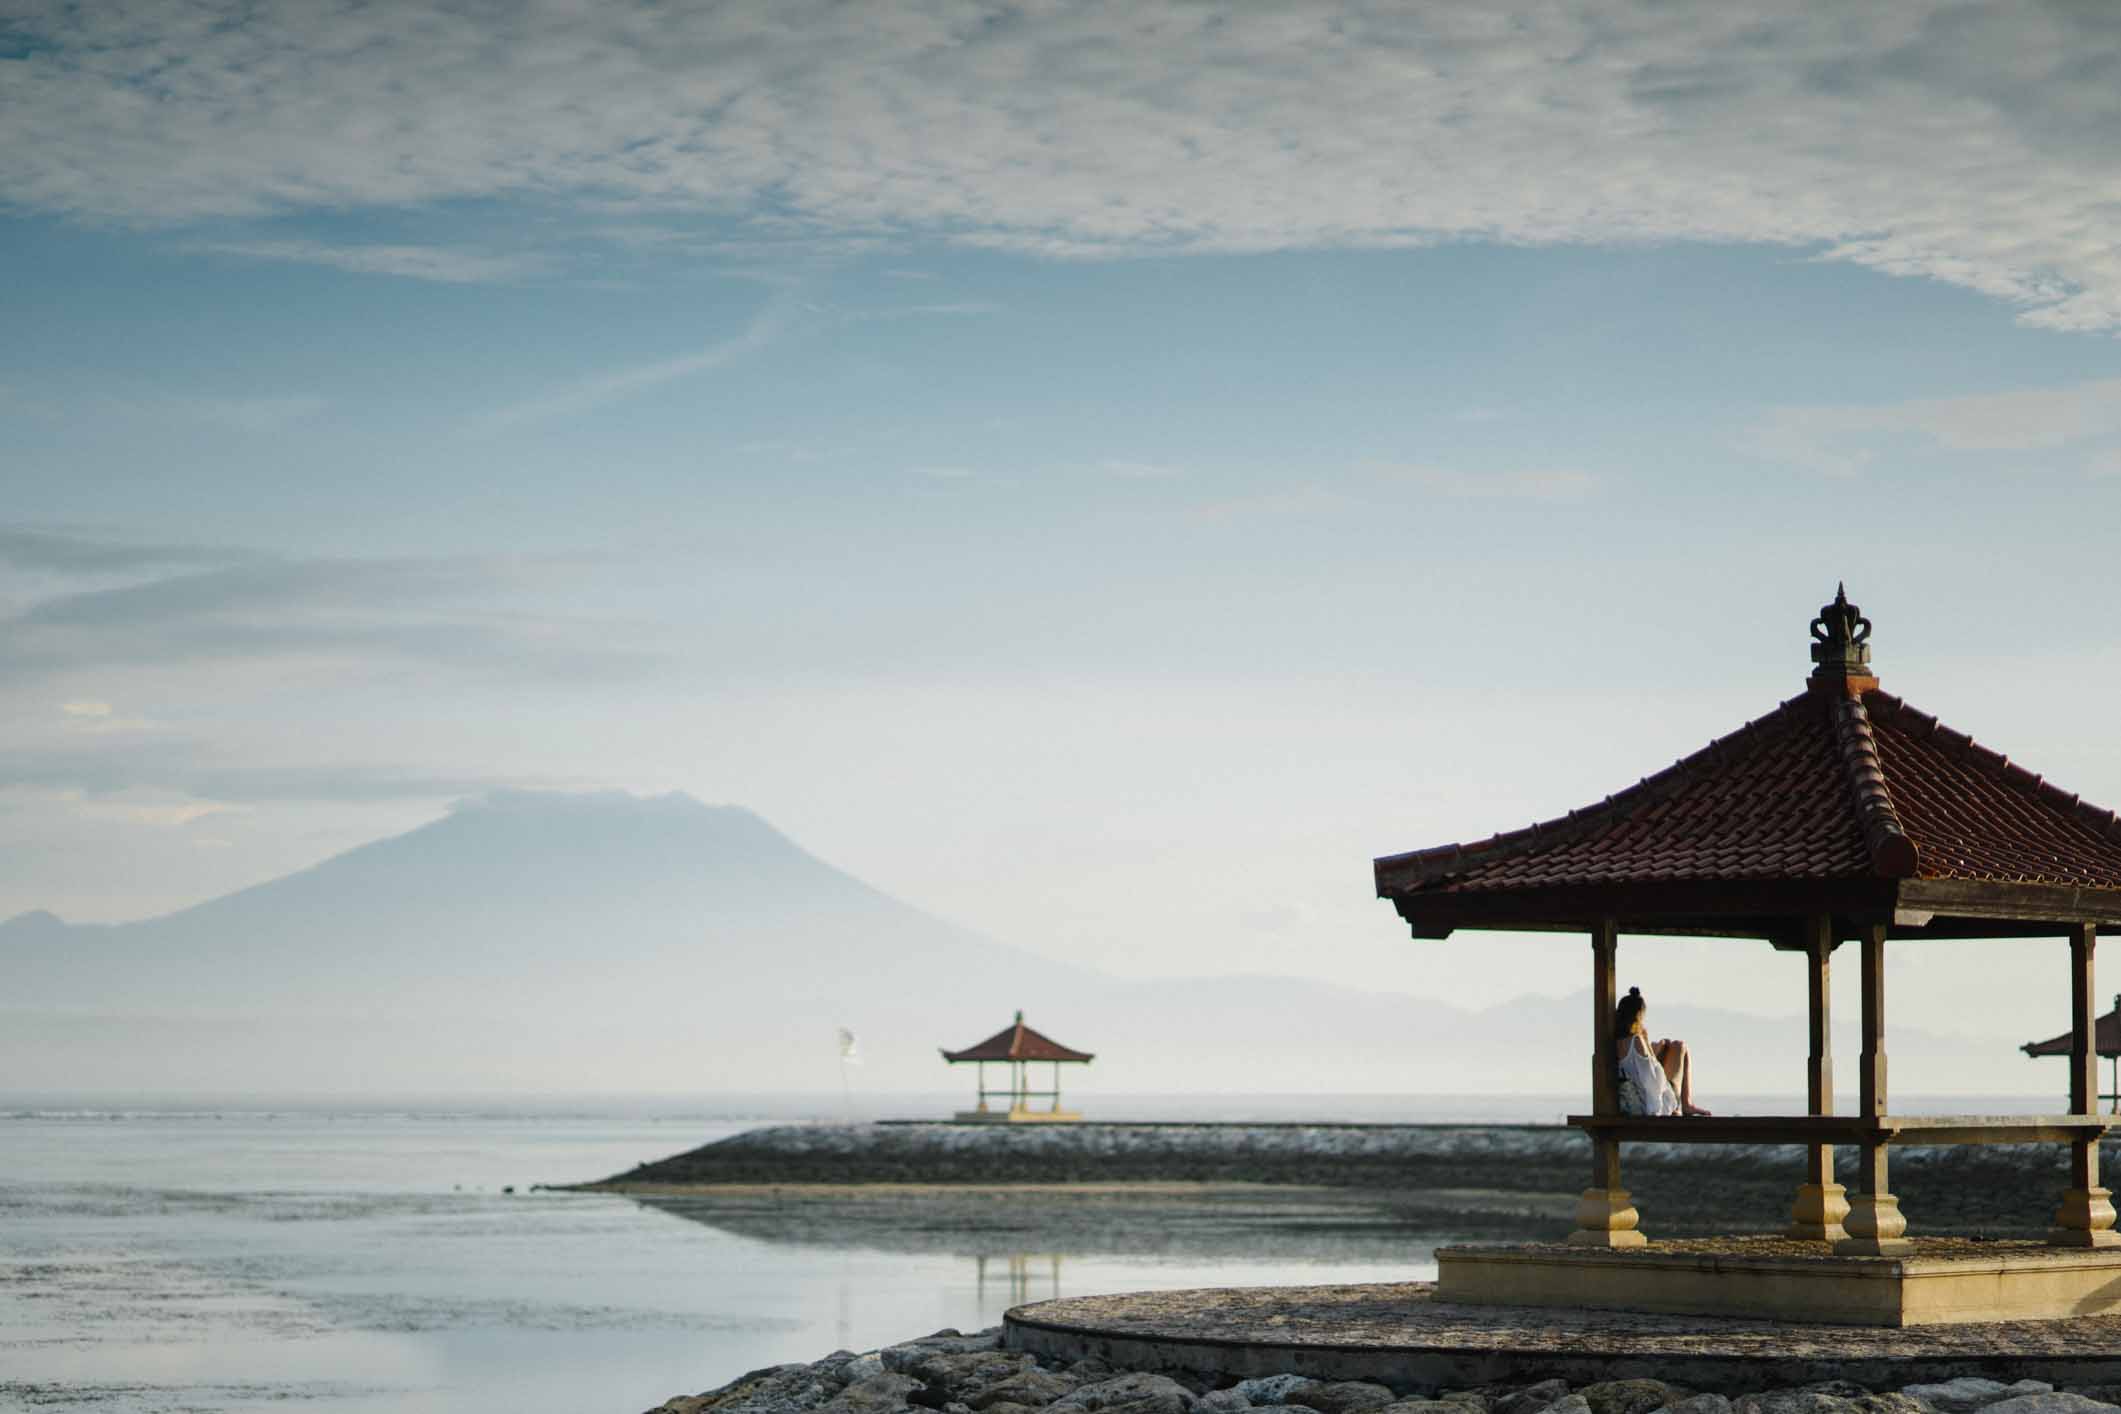 Amed Bali – A Complete Area Guide To Read Before Your Trip